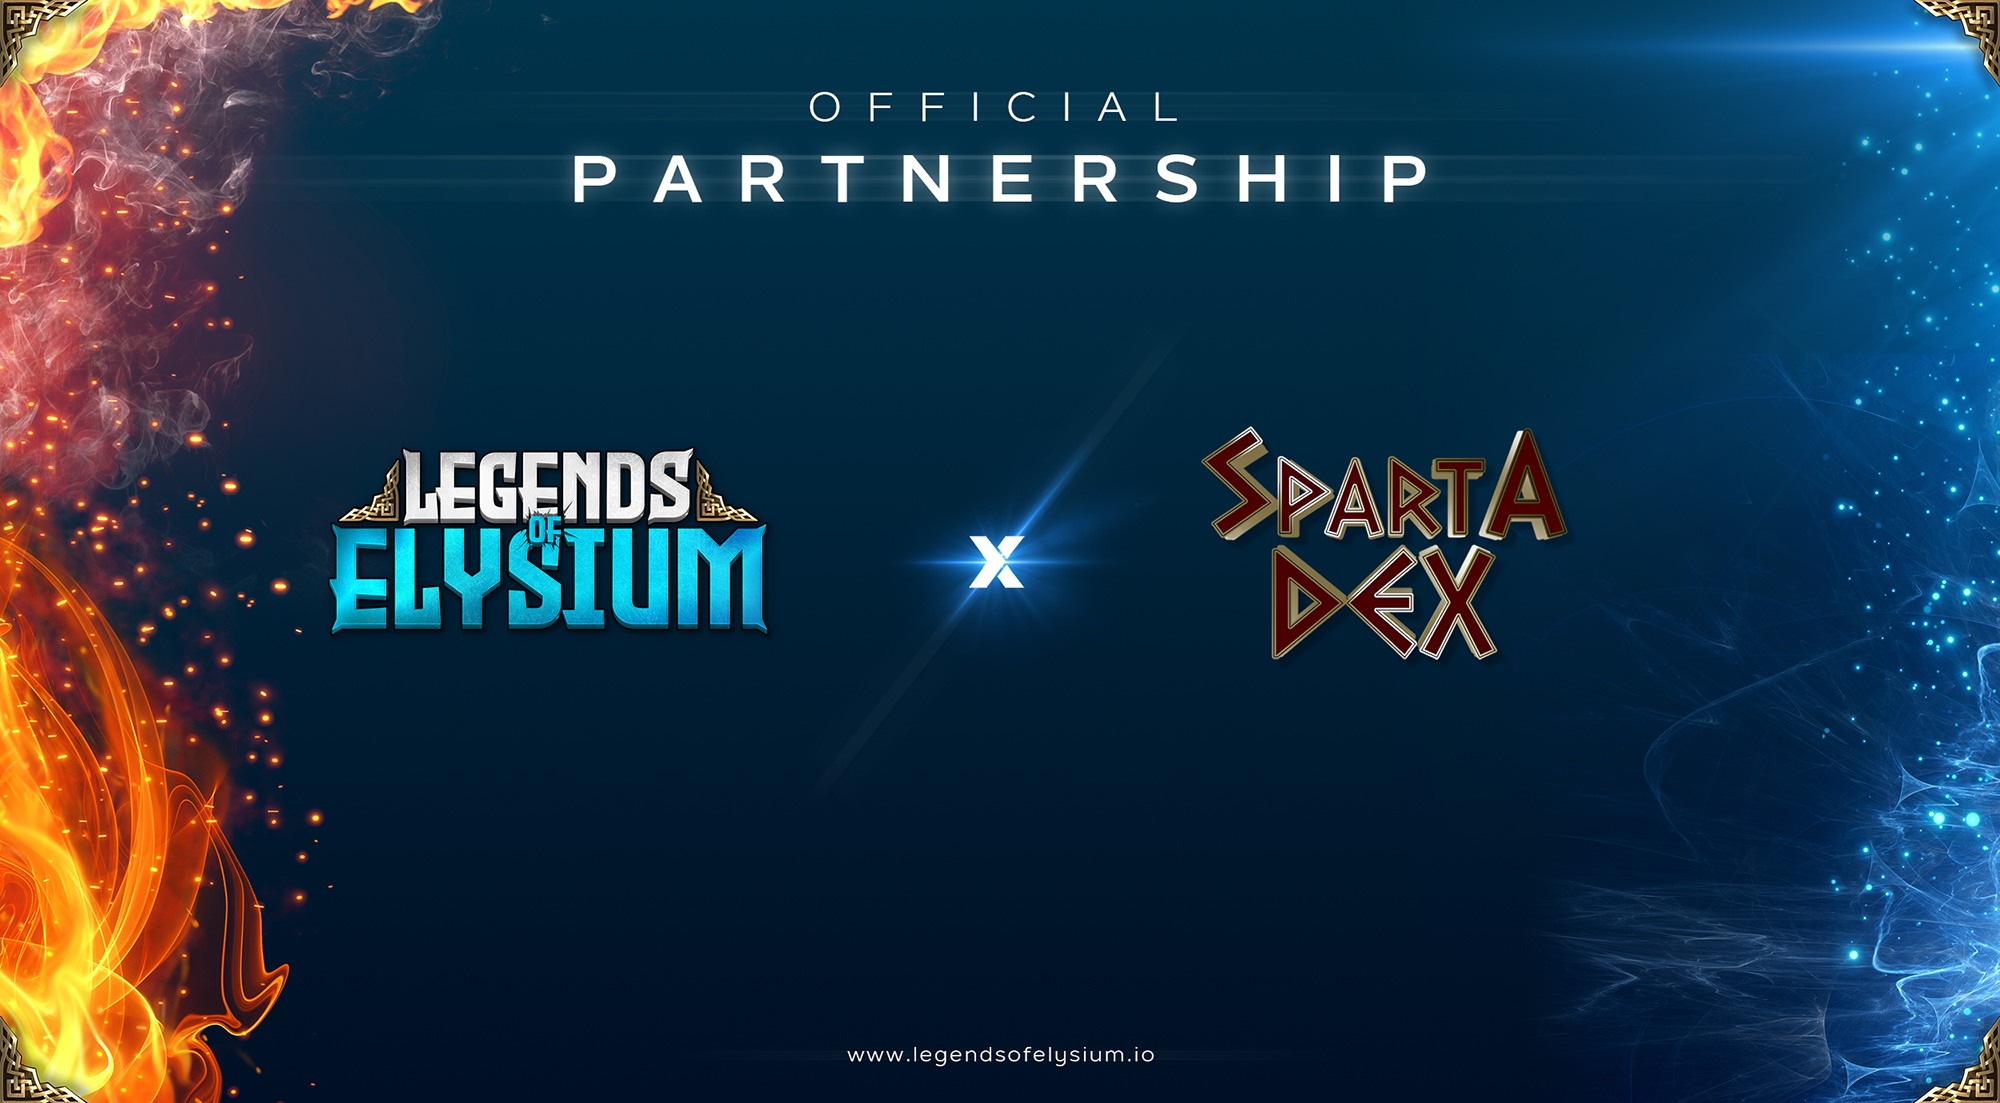 An-official-partnership-between-SpartaDEX-and-Legends-of-Elysium-free-to-play-fusion-of-digital-trading-card-and-board-game